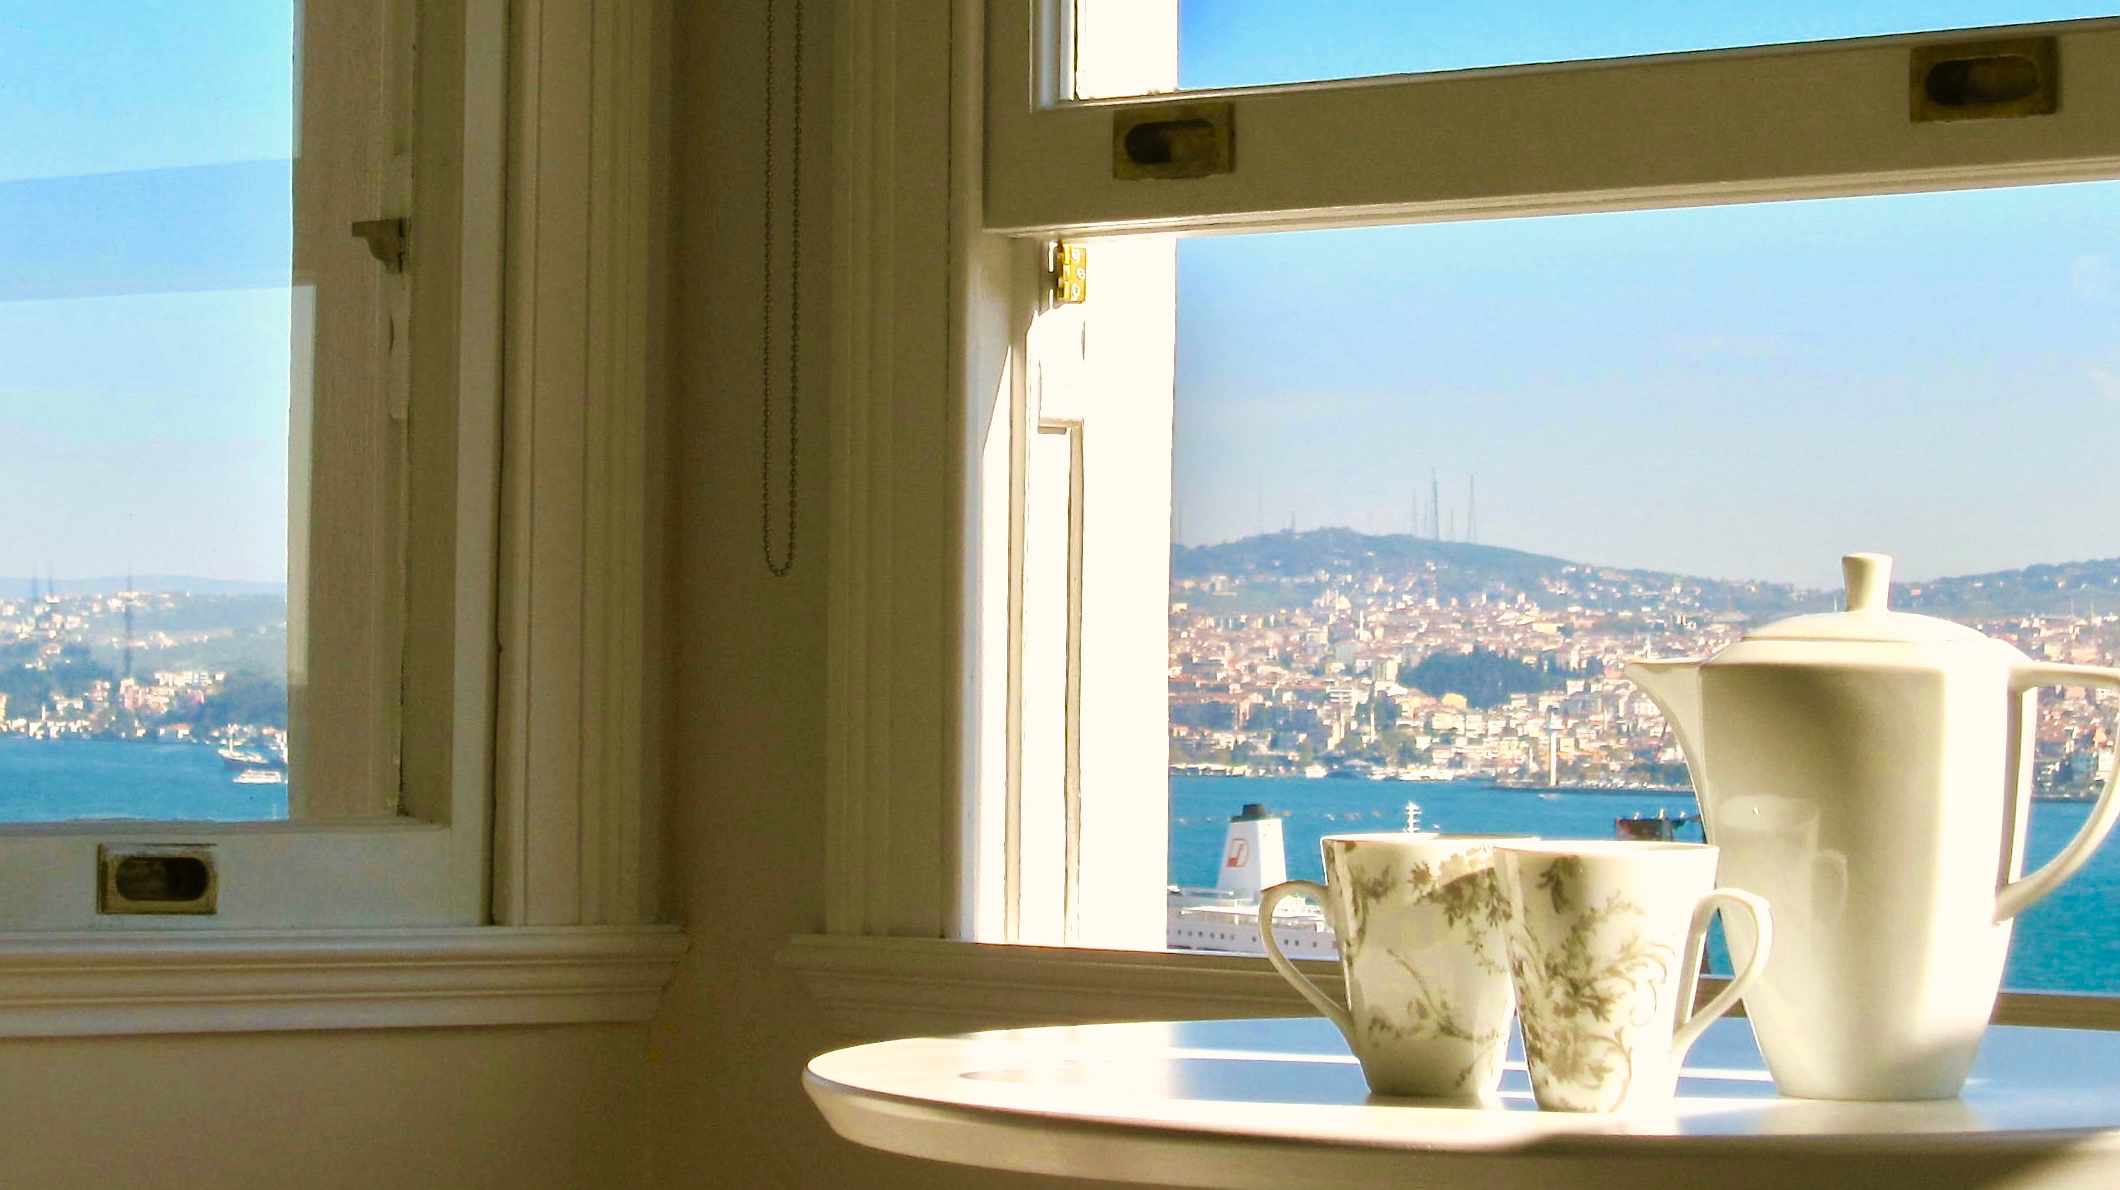 Furnished 3 bedroom apartment for residential rent with high ceilings and views across Bosphorus and Golden Horn located by Galata Tower in Beyoglu, Istanbul.